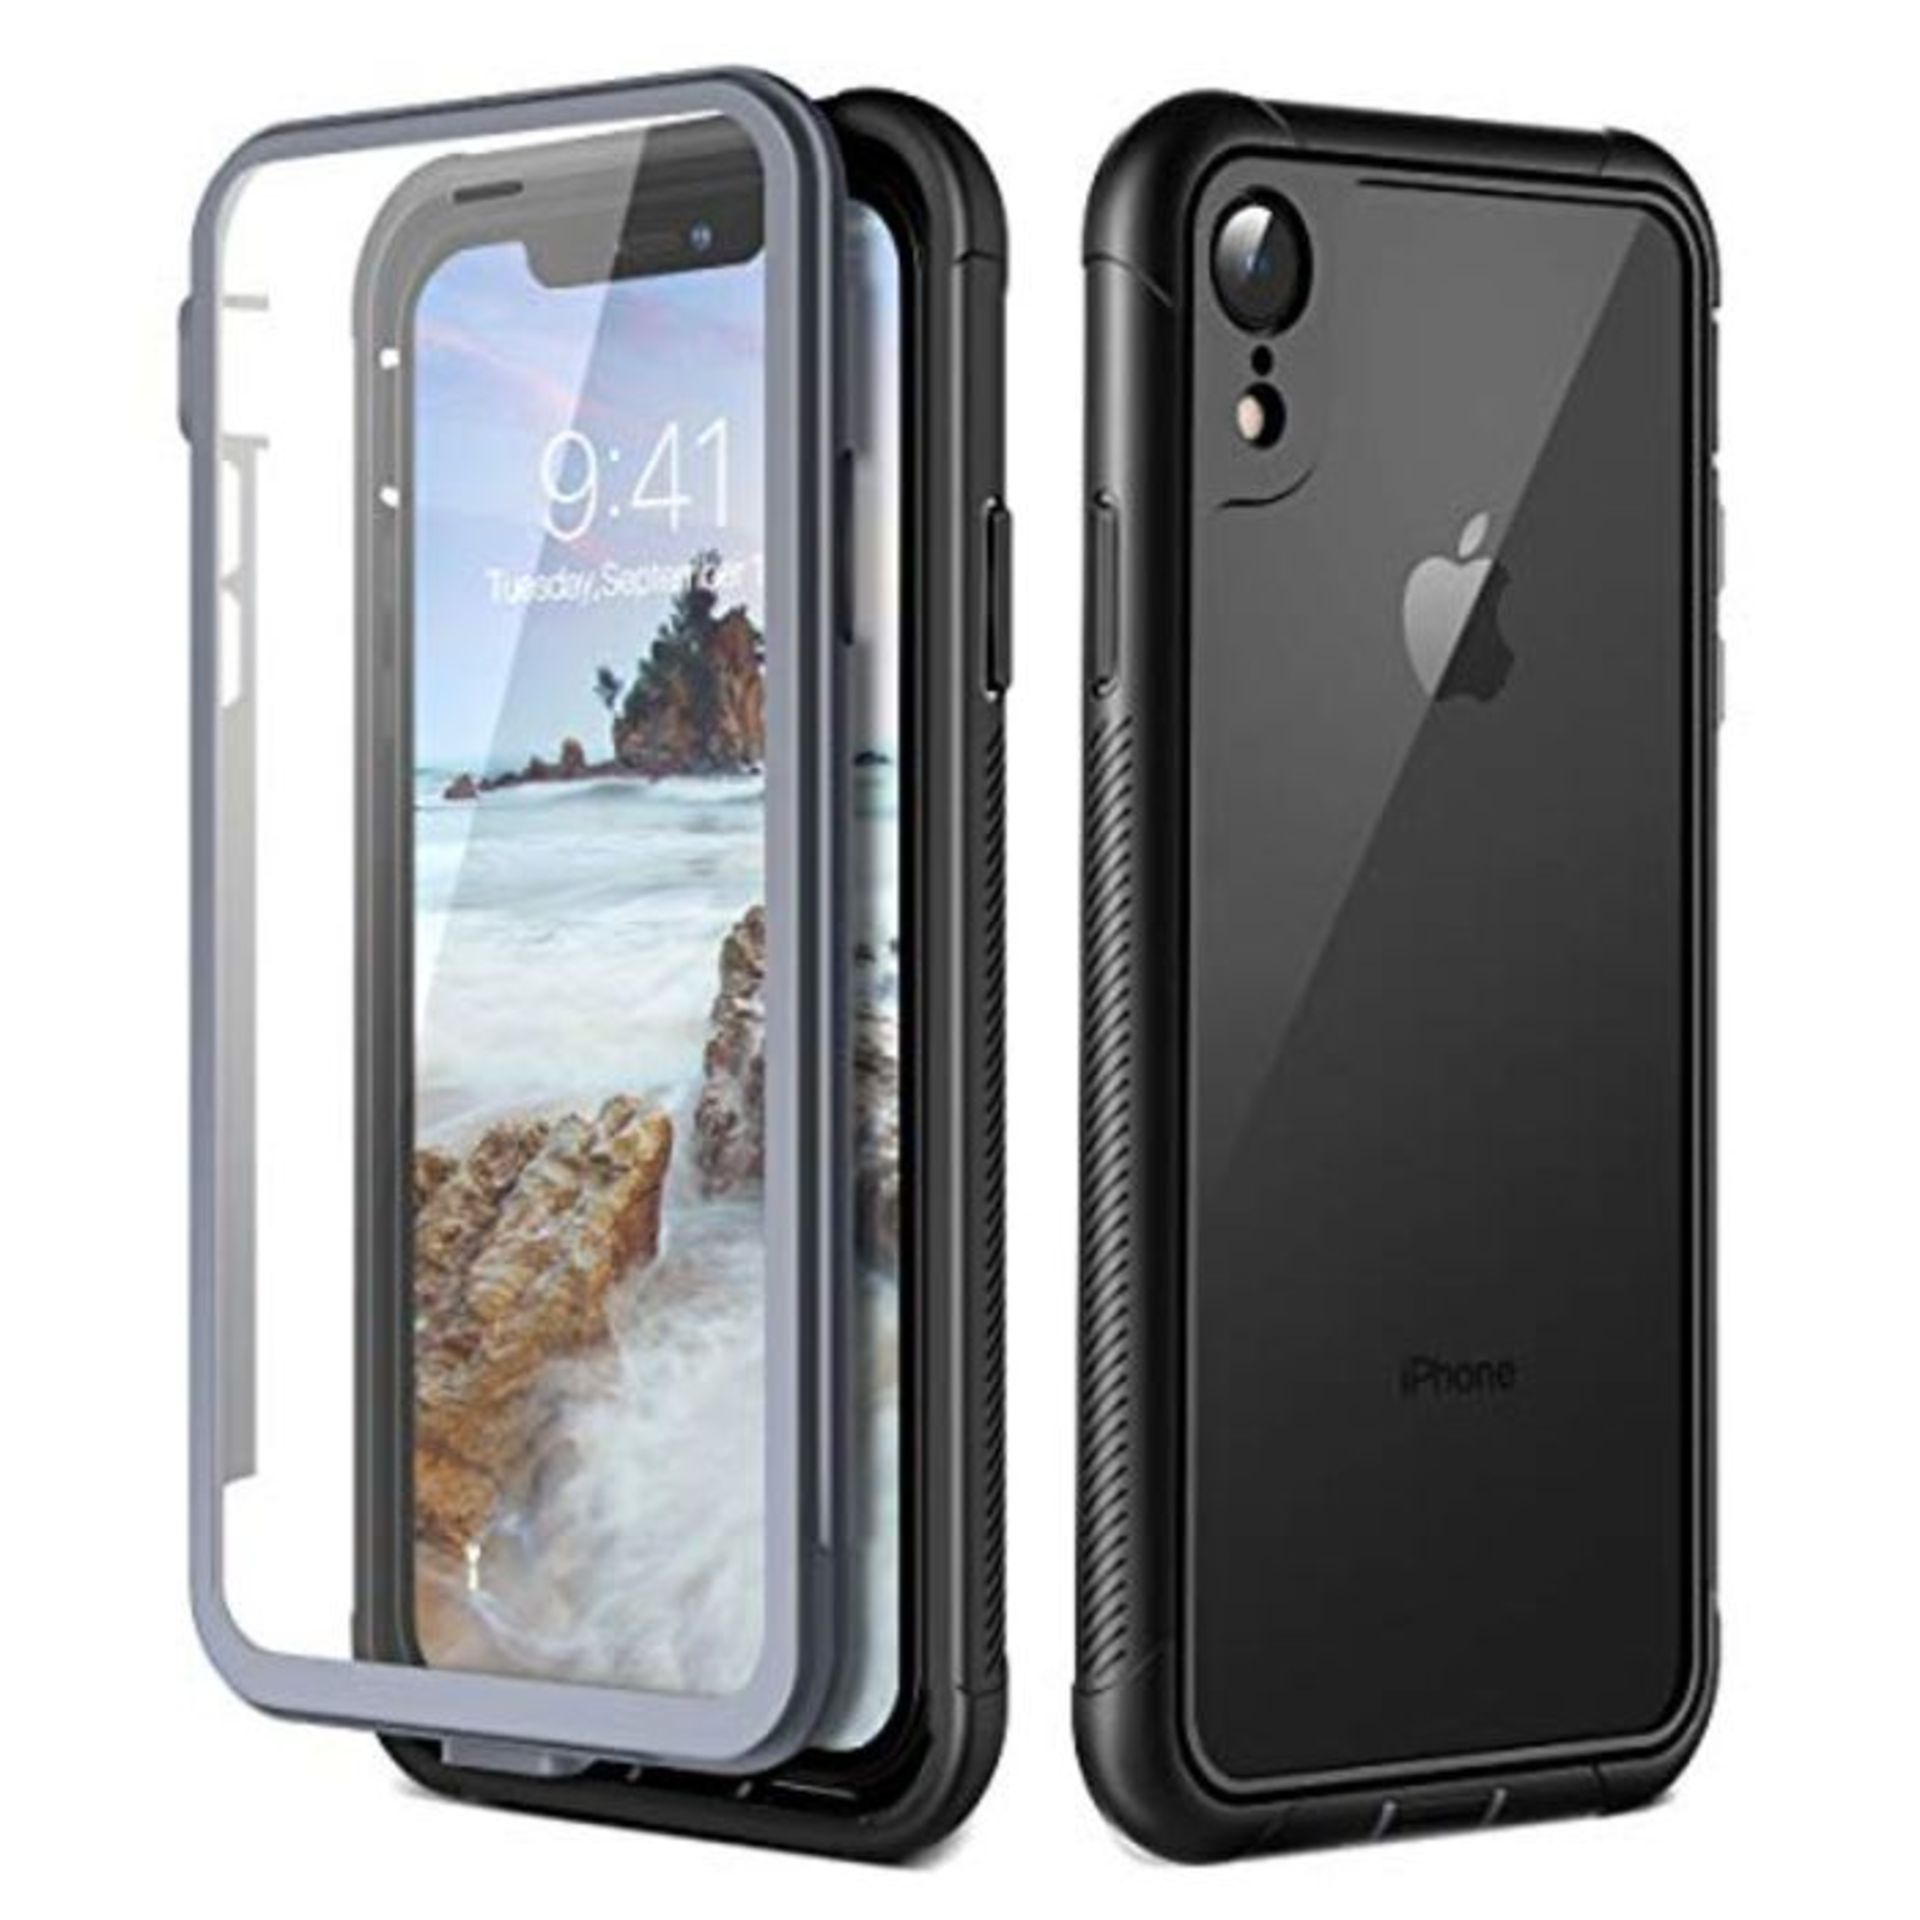 Prologfer iPhone XR Case 360 Degree Protection Built-in Screen Protector Cover Shockpr